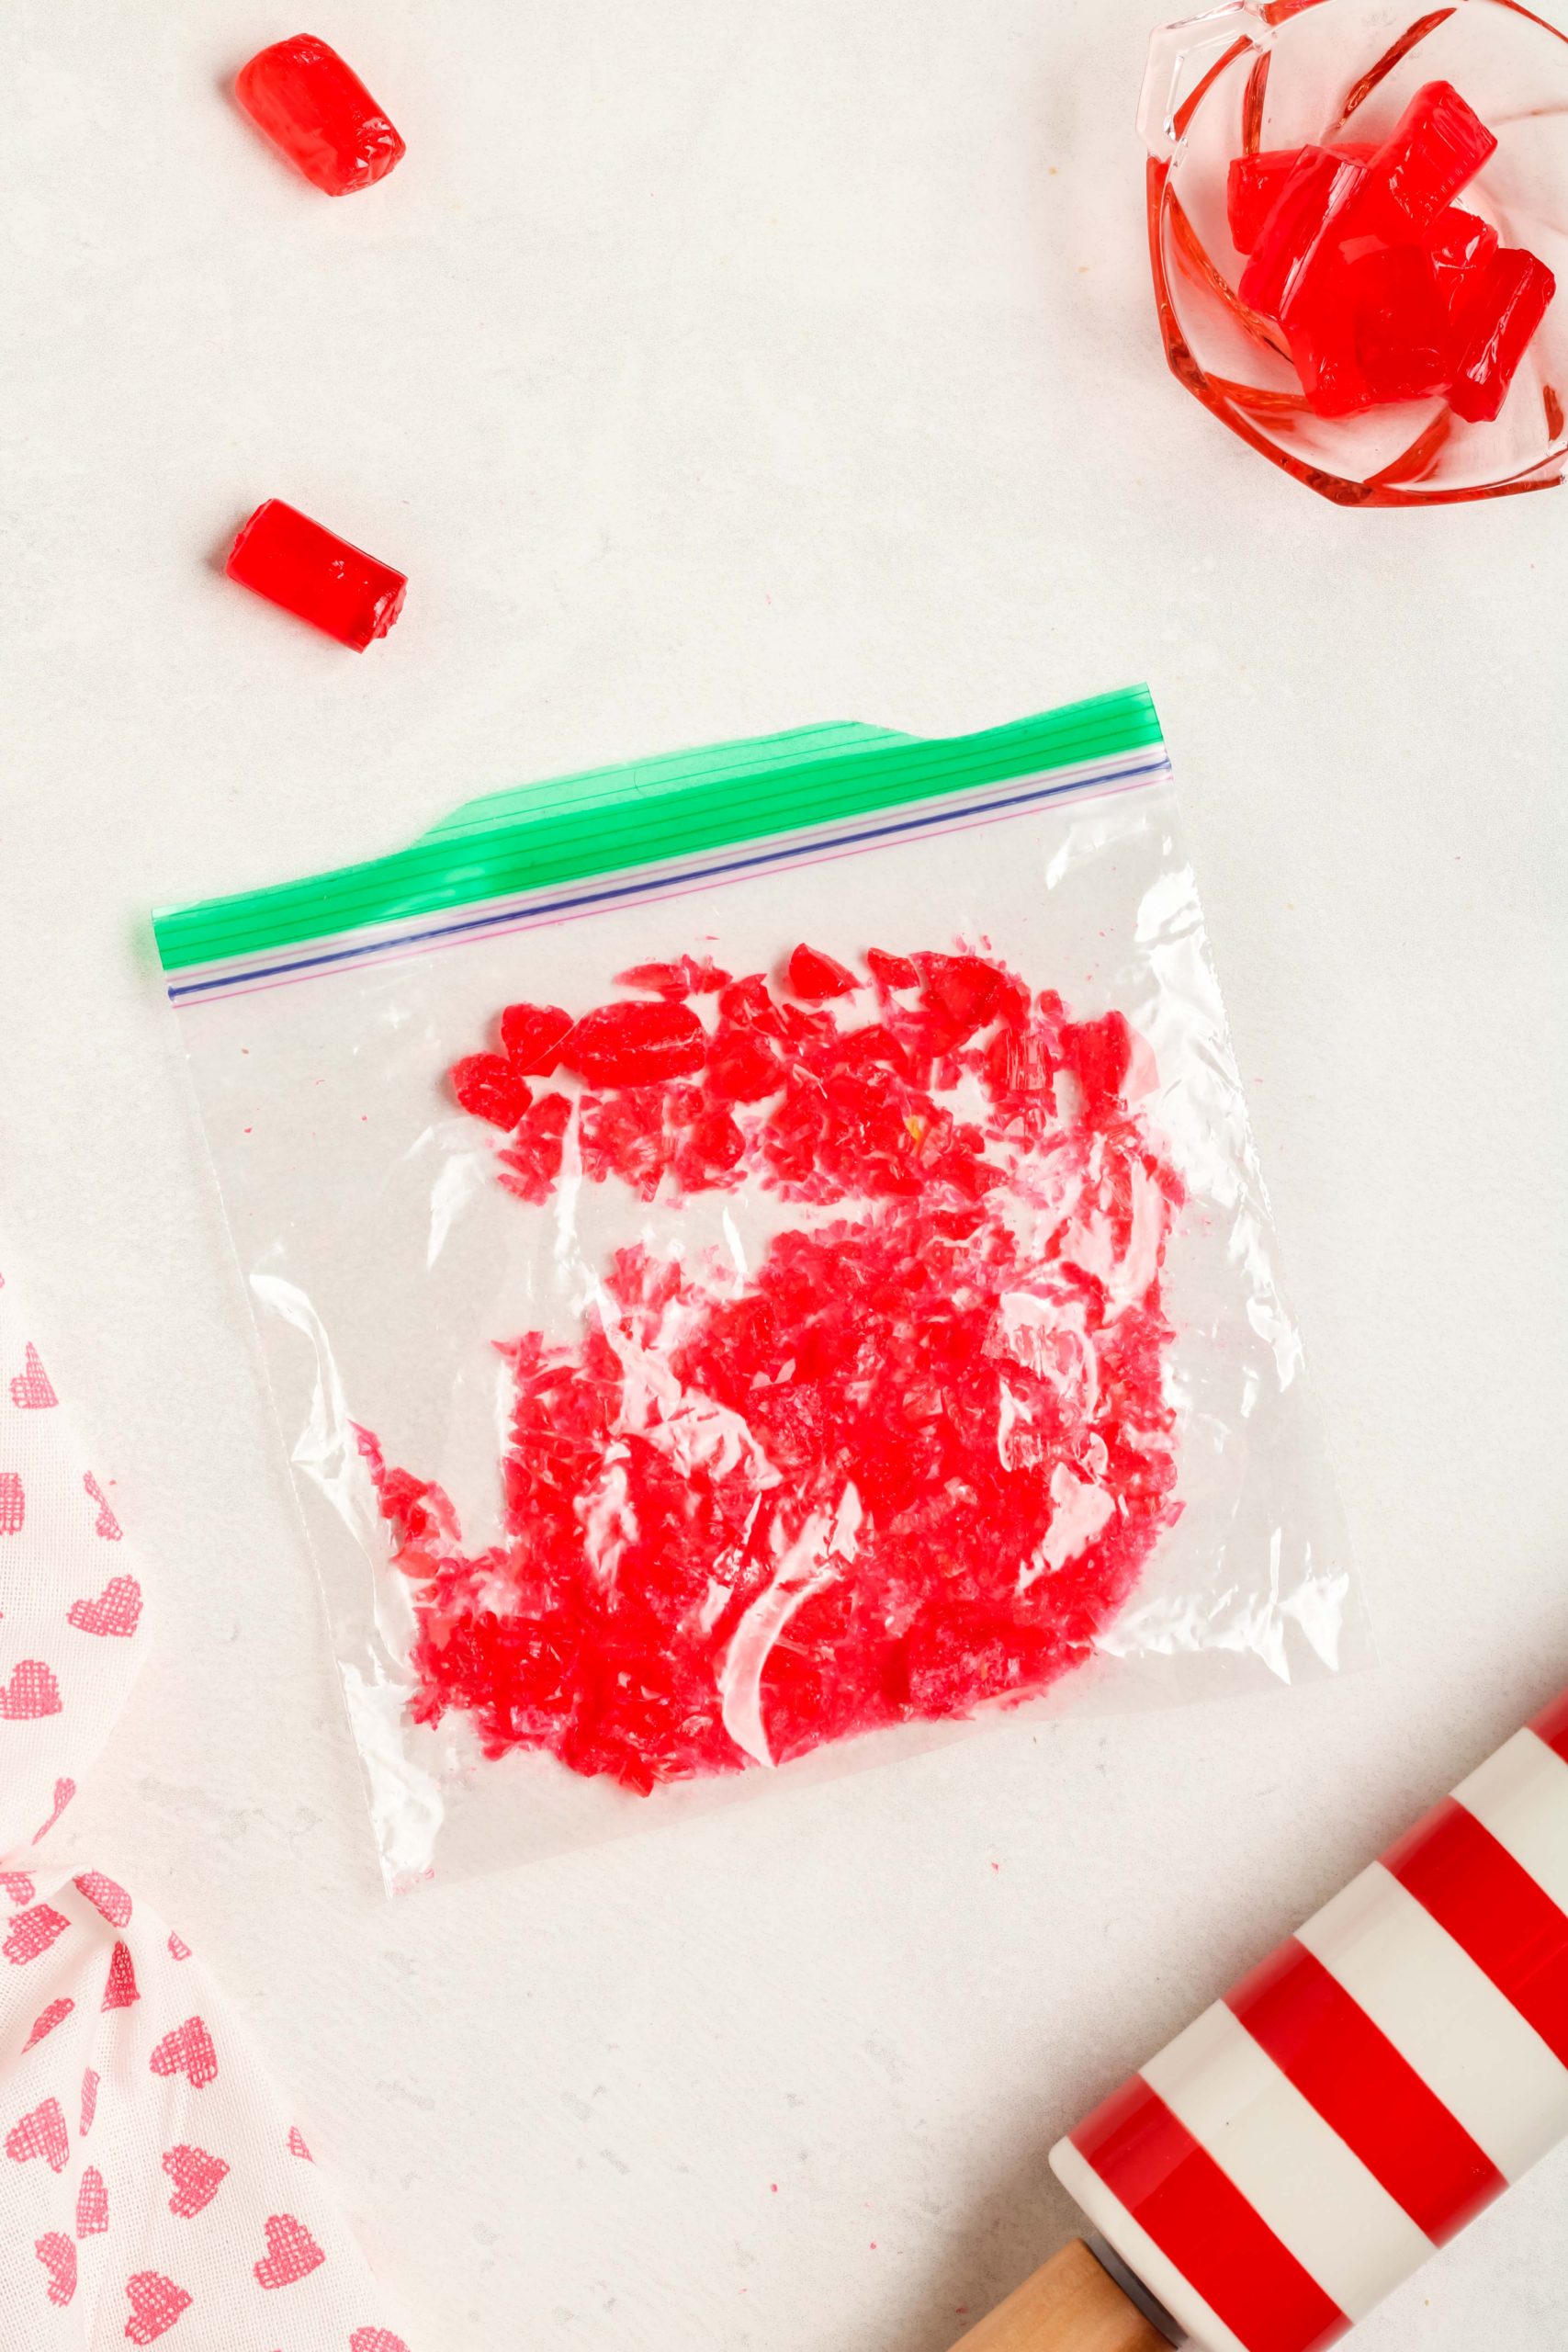 Crushed red jolly ranchers in a ziplock bag